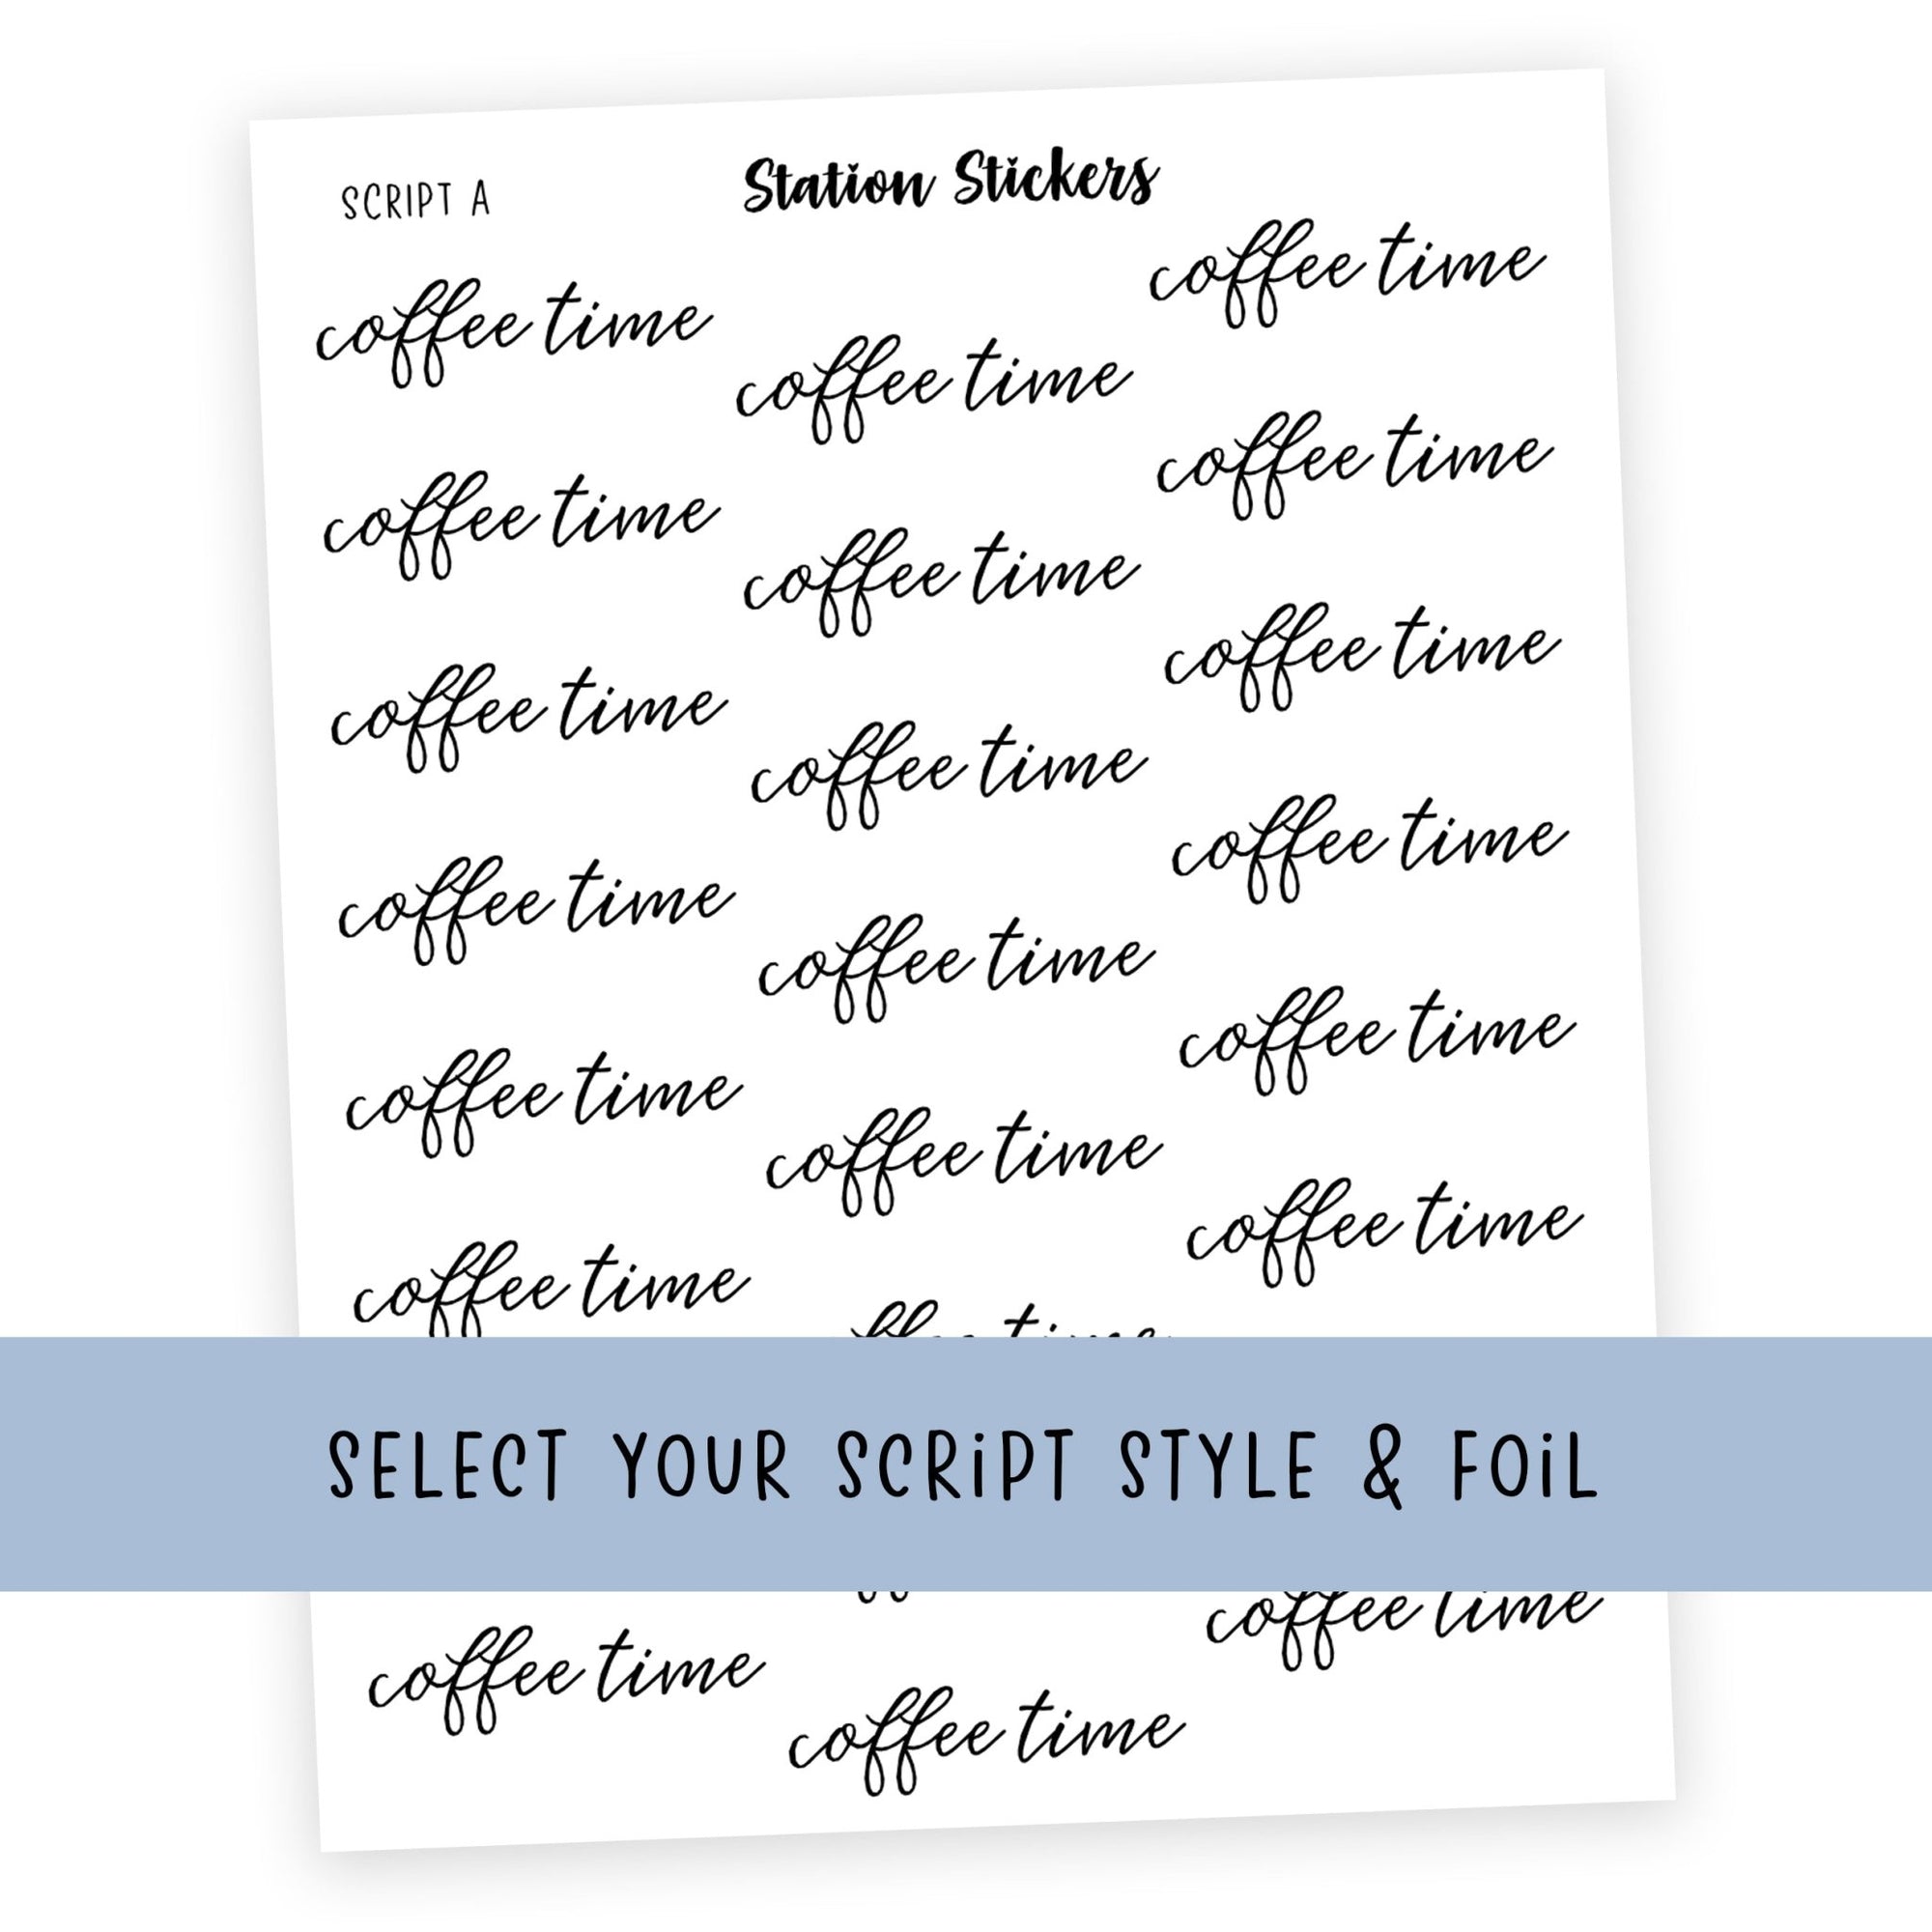 Coffee Time • Script Stickers - Station Stickers